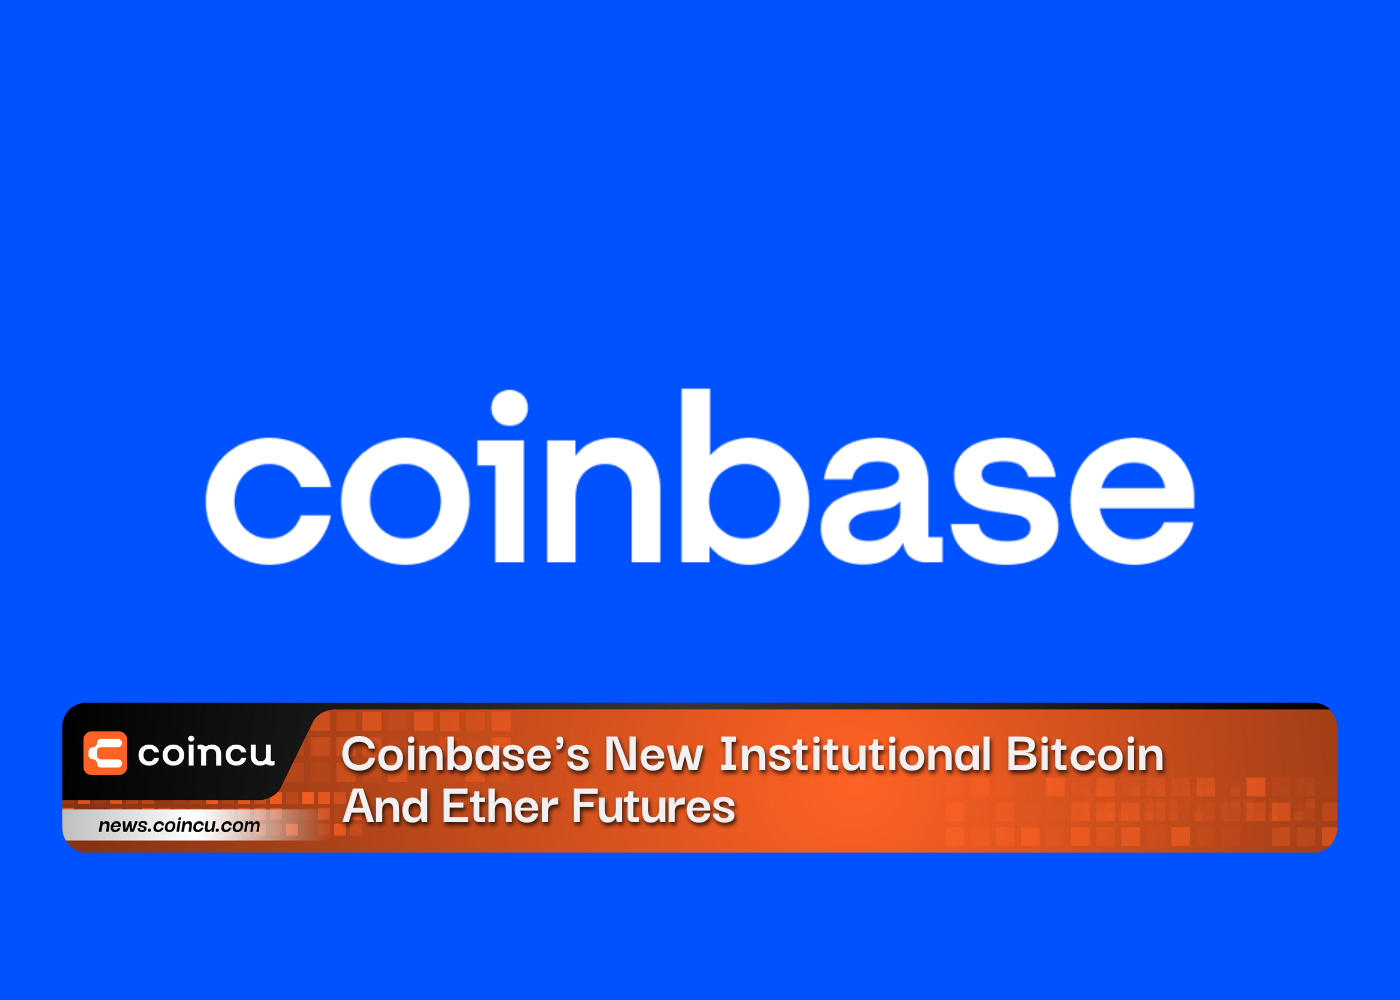 Coinbases New Institutional Bitcoin